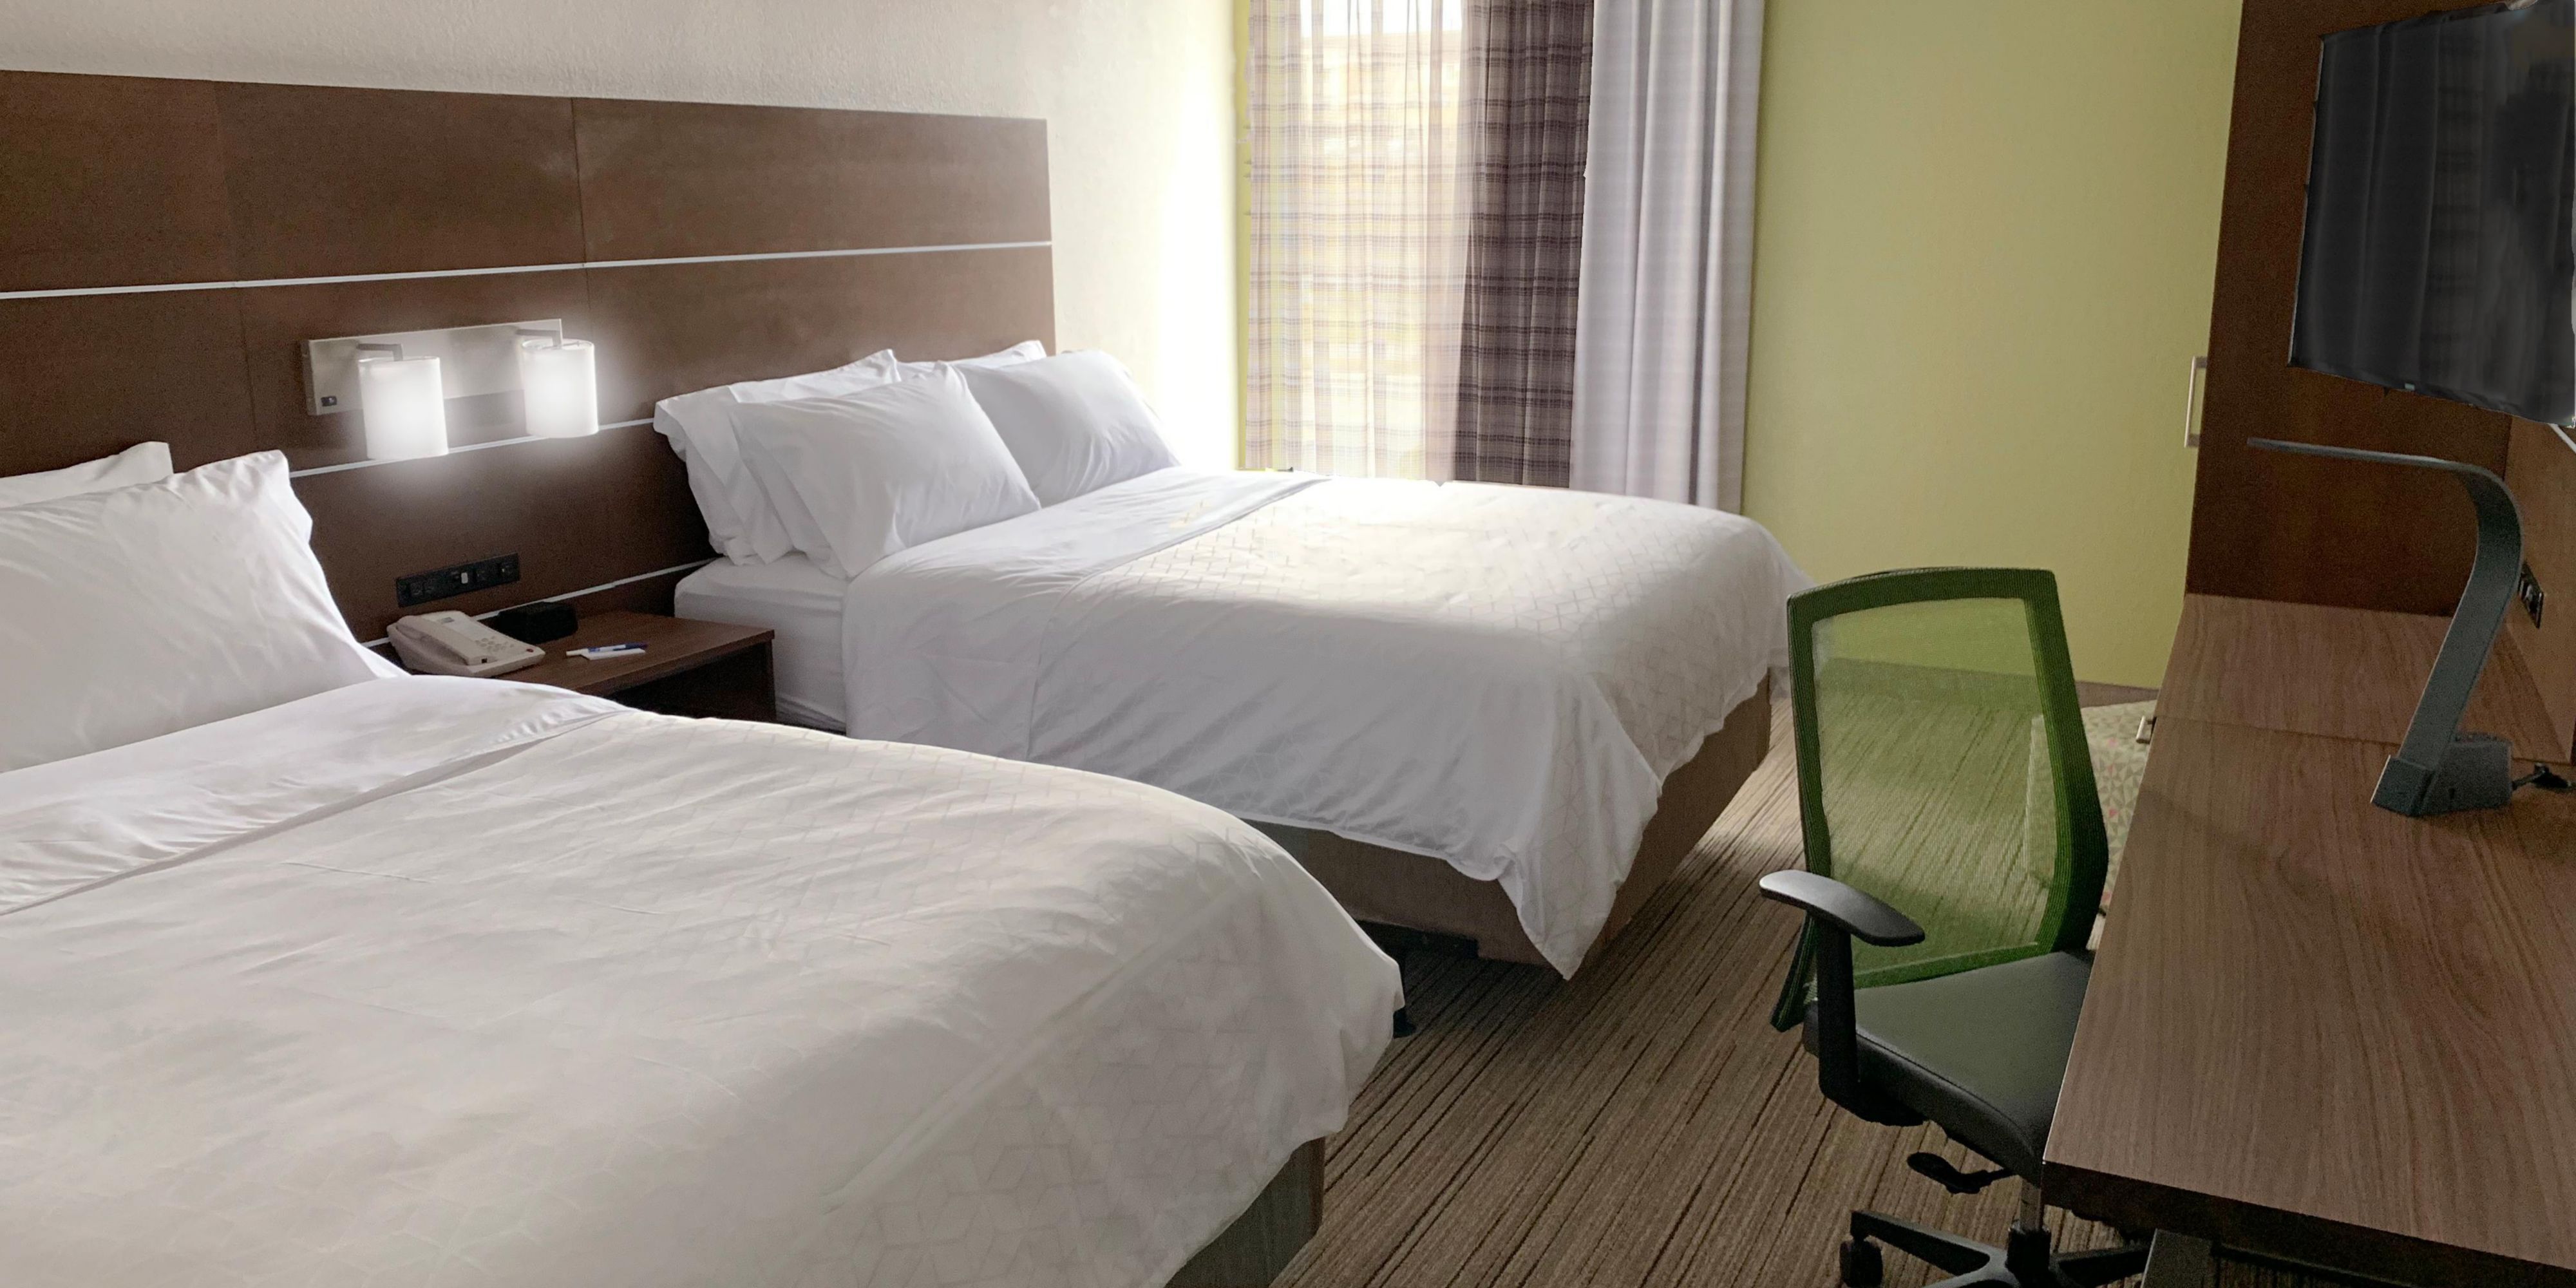 Our hotel has been renovated from top to bottom to bring you the bright and airy feel that you have come to expect with the new Holiday Inn Express design.  Enjoy modern rooms with ample outlets/USB ports and an enlarged lobby with a separate breakfast seating area.